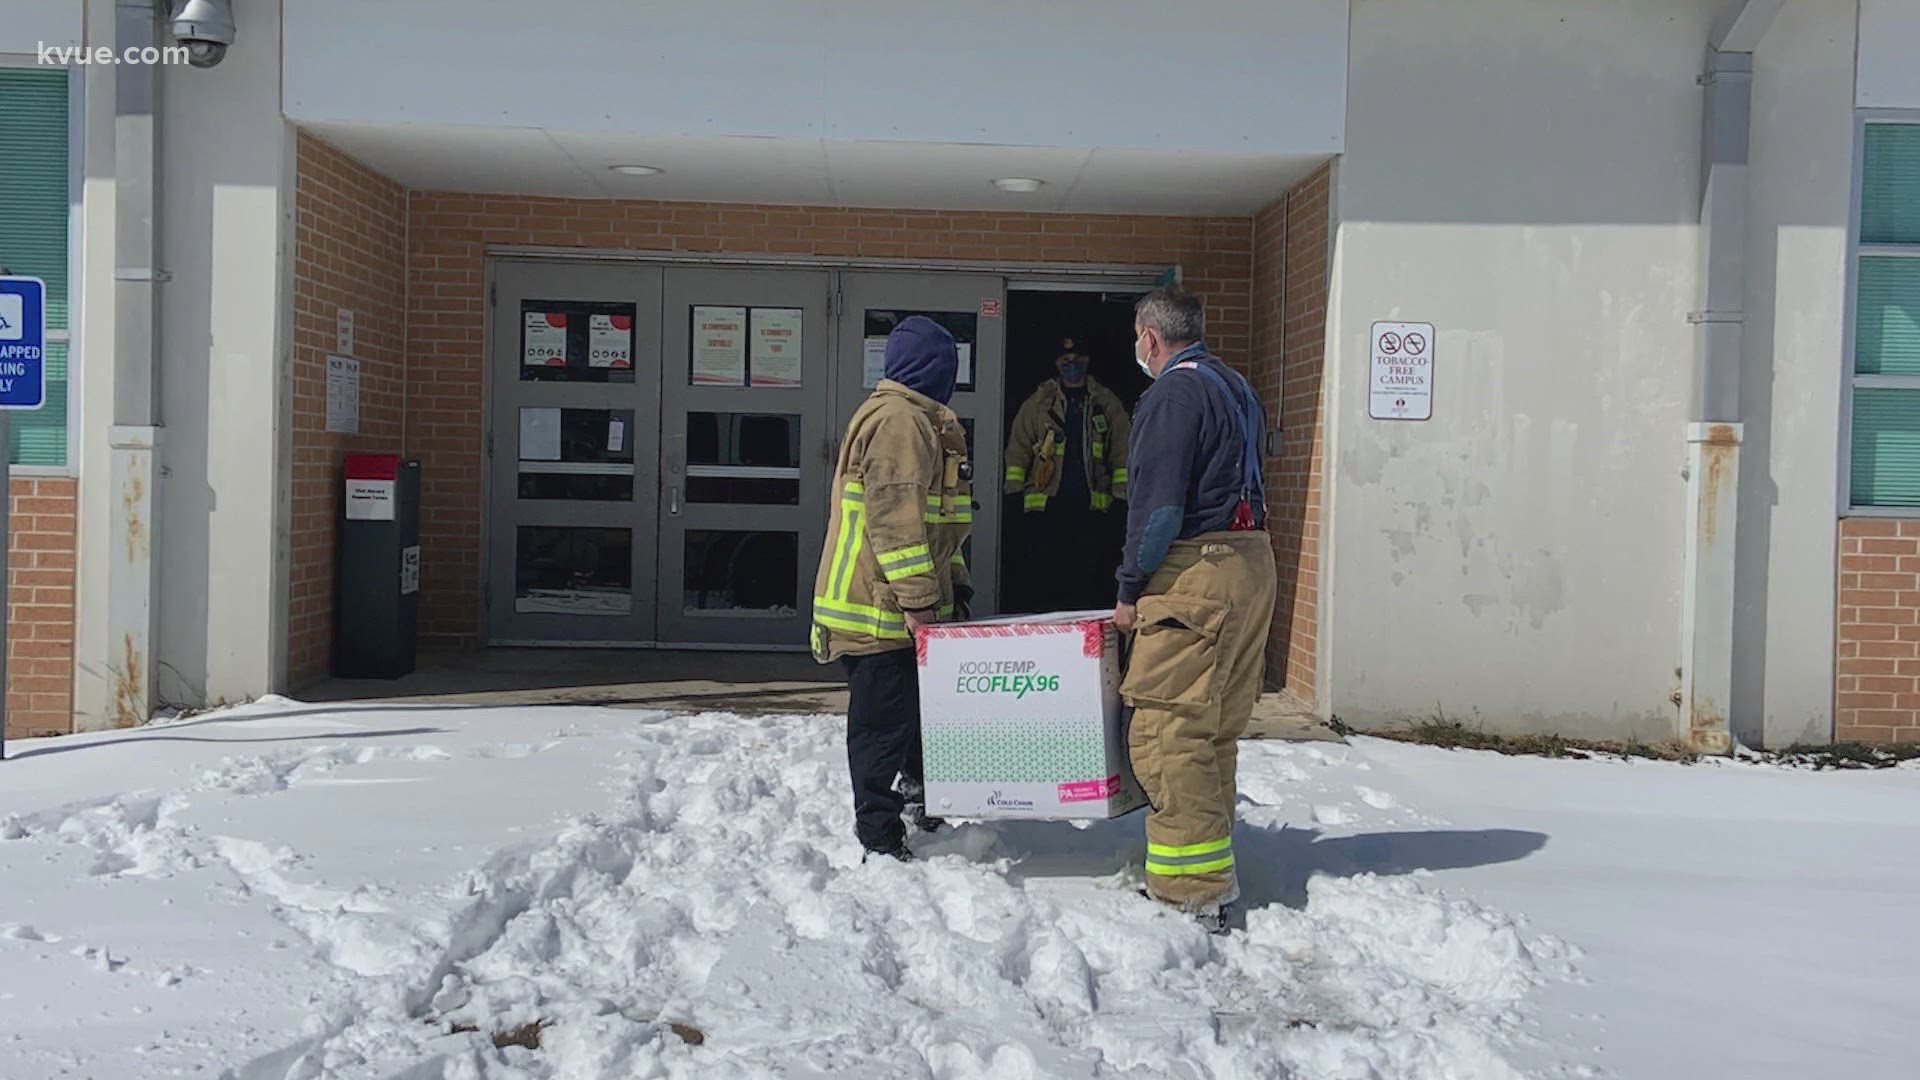 Several cases of COVID-19 vaccine were at risk of spoiling due to power outages, but AFD firefighters jumped into action.